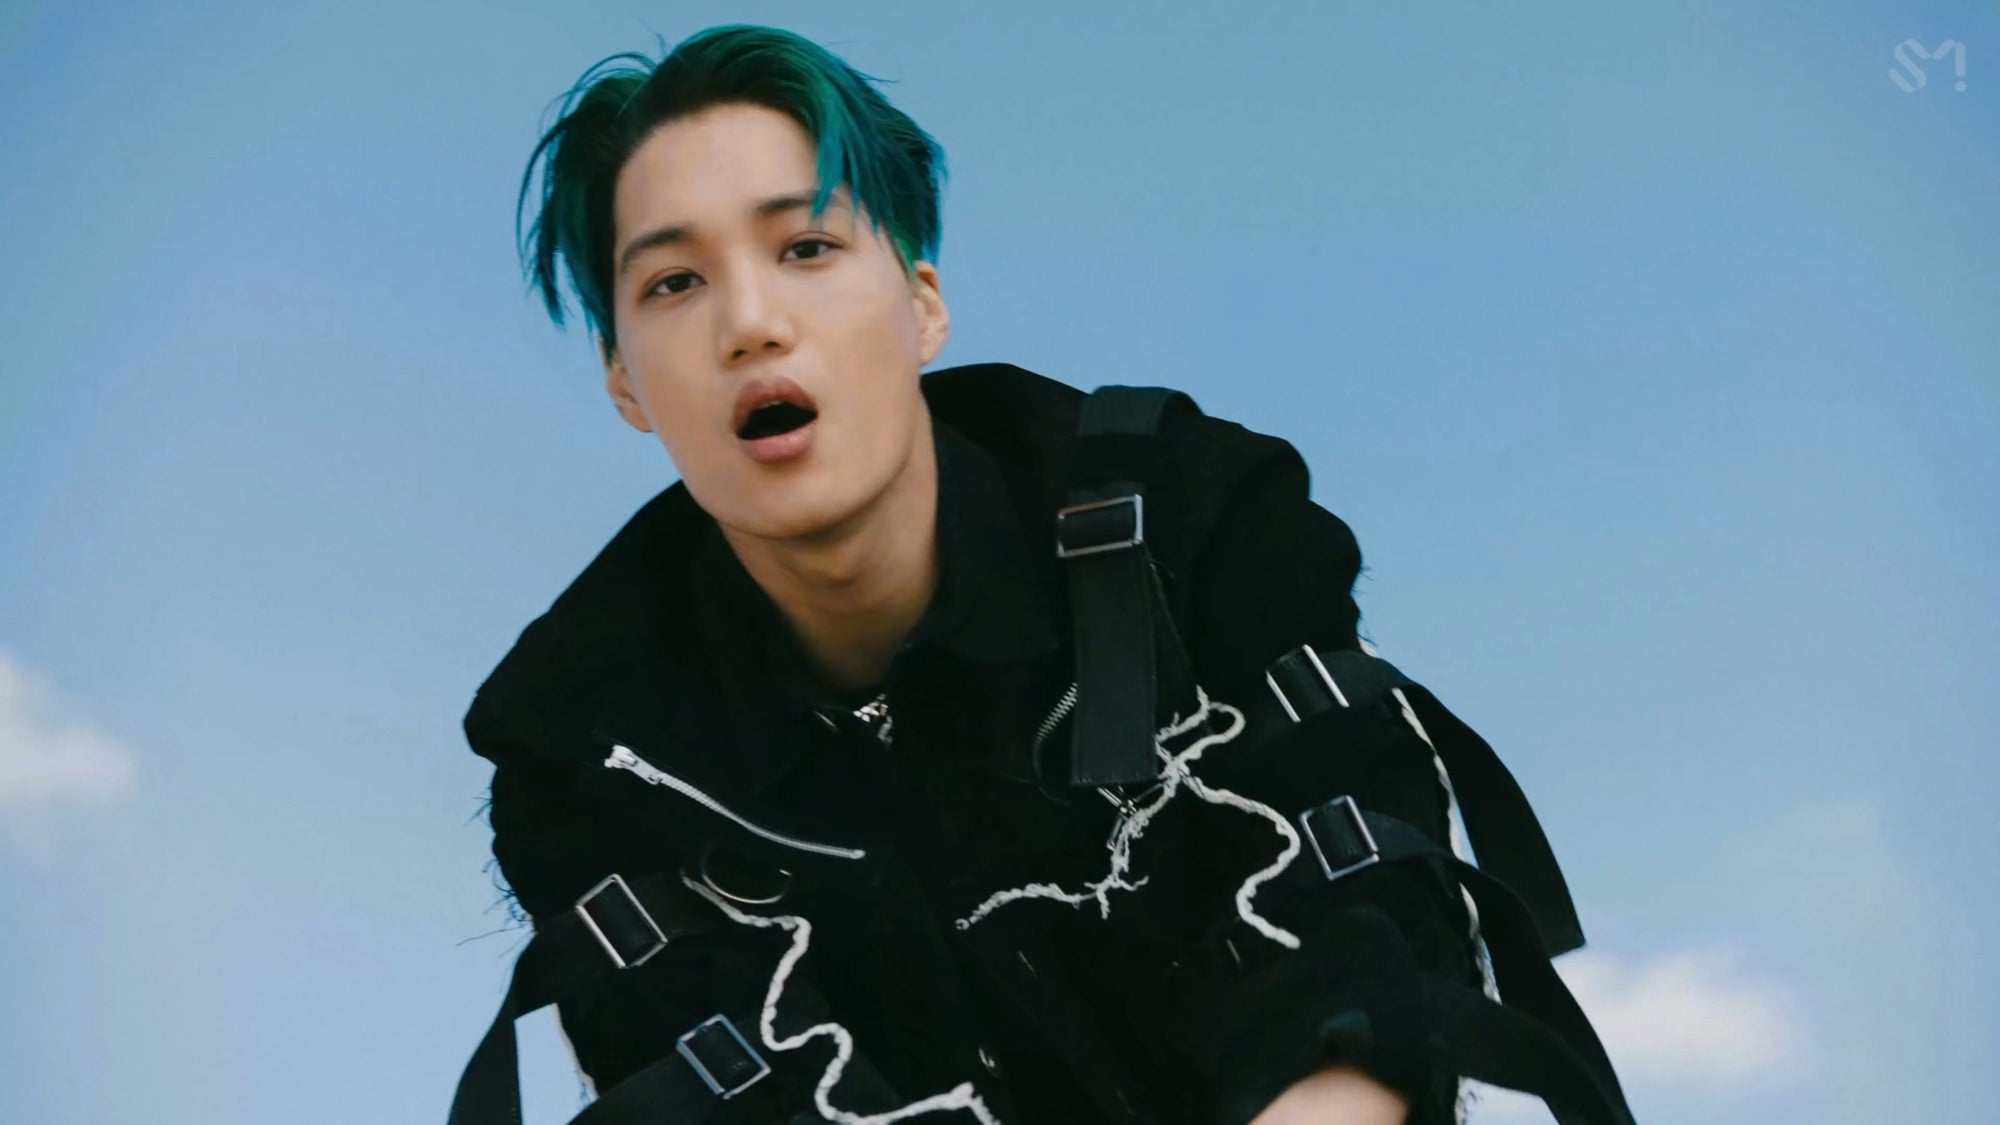 Exo's Kai, The First Korean To Lead as Gucci's Global Brand